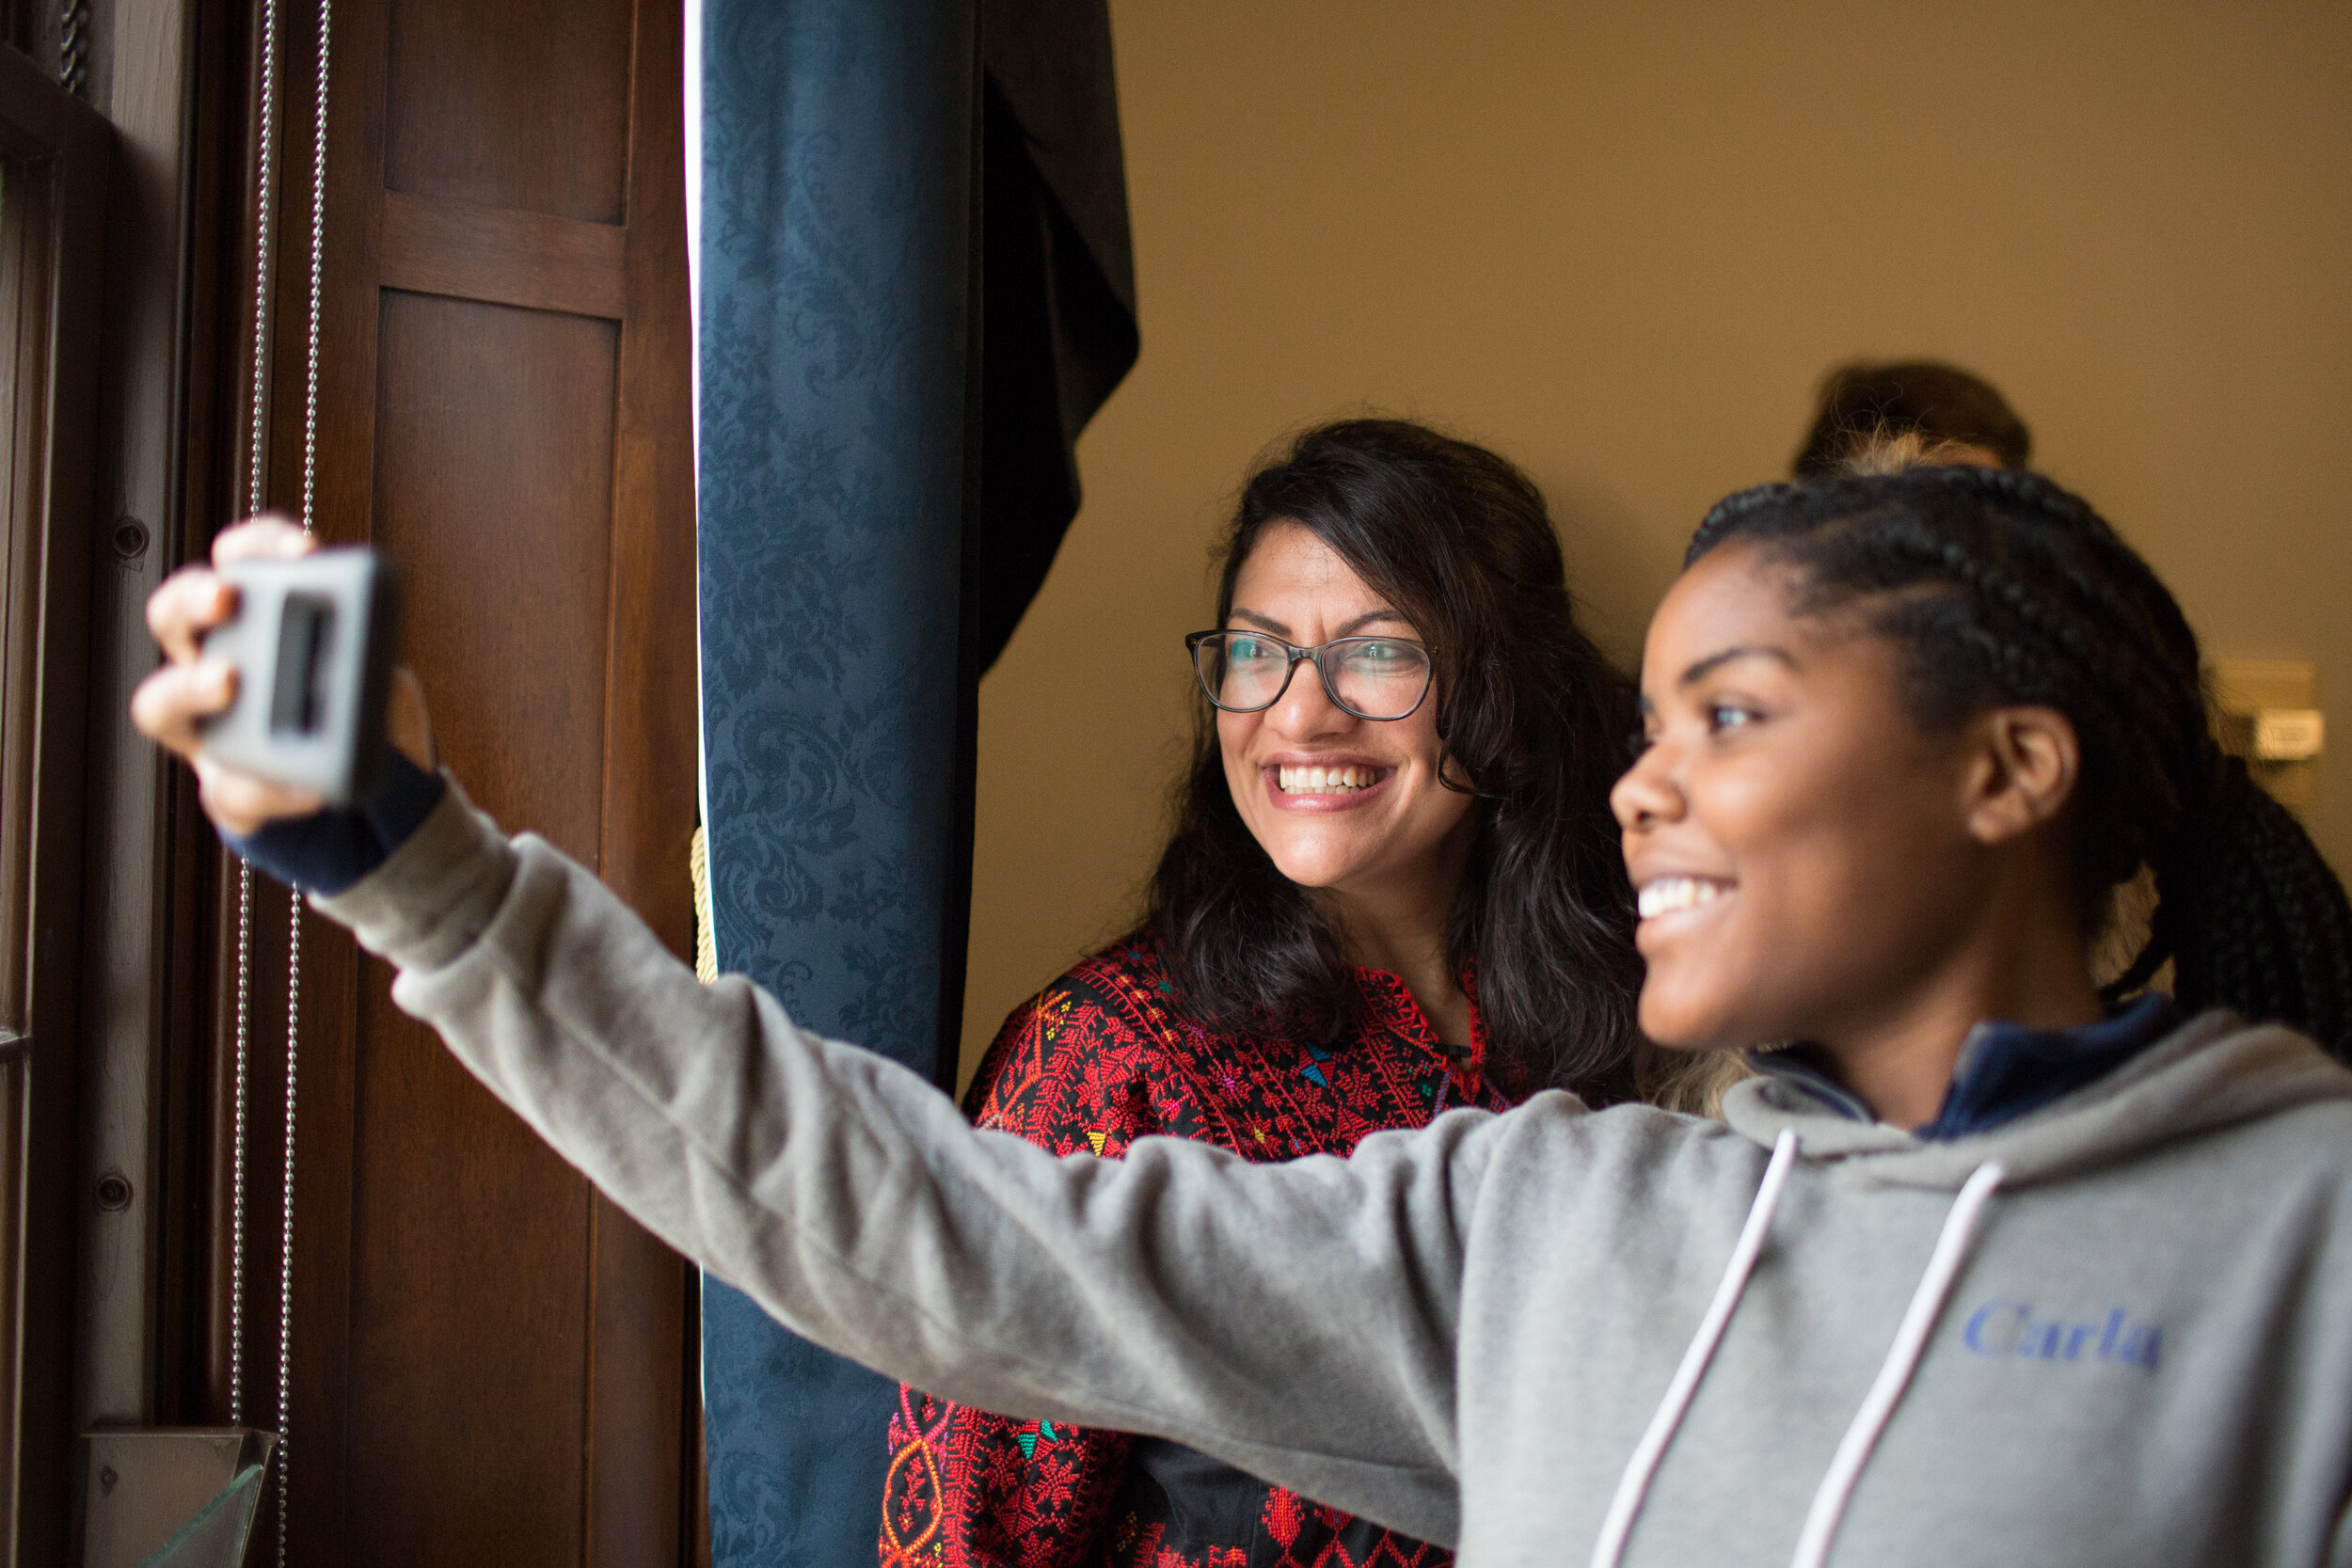  U.S. Rep. Rashida Tlaib poses for a selfie with Carla, a supporter and constituent, immediately before the swearing in of the 116th Congress in Washington D.C., Thursday, Jan. 3, 2019. 